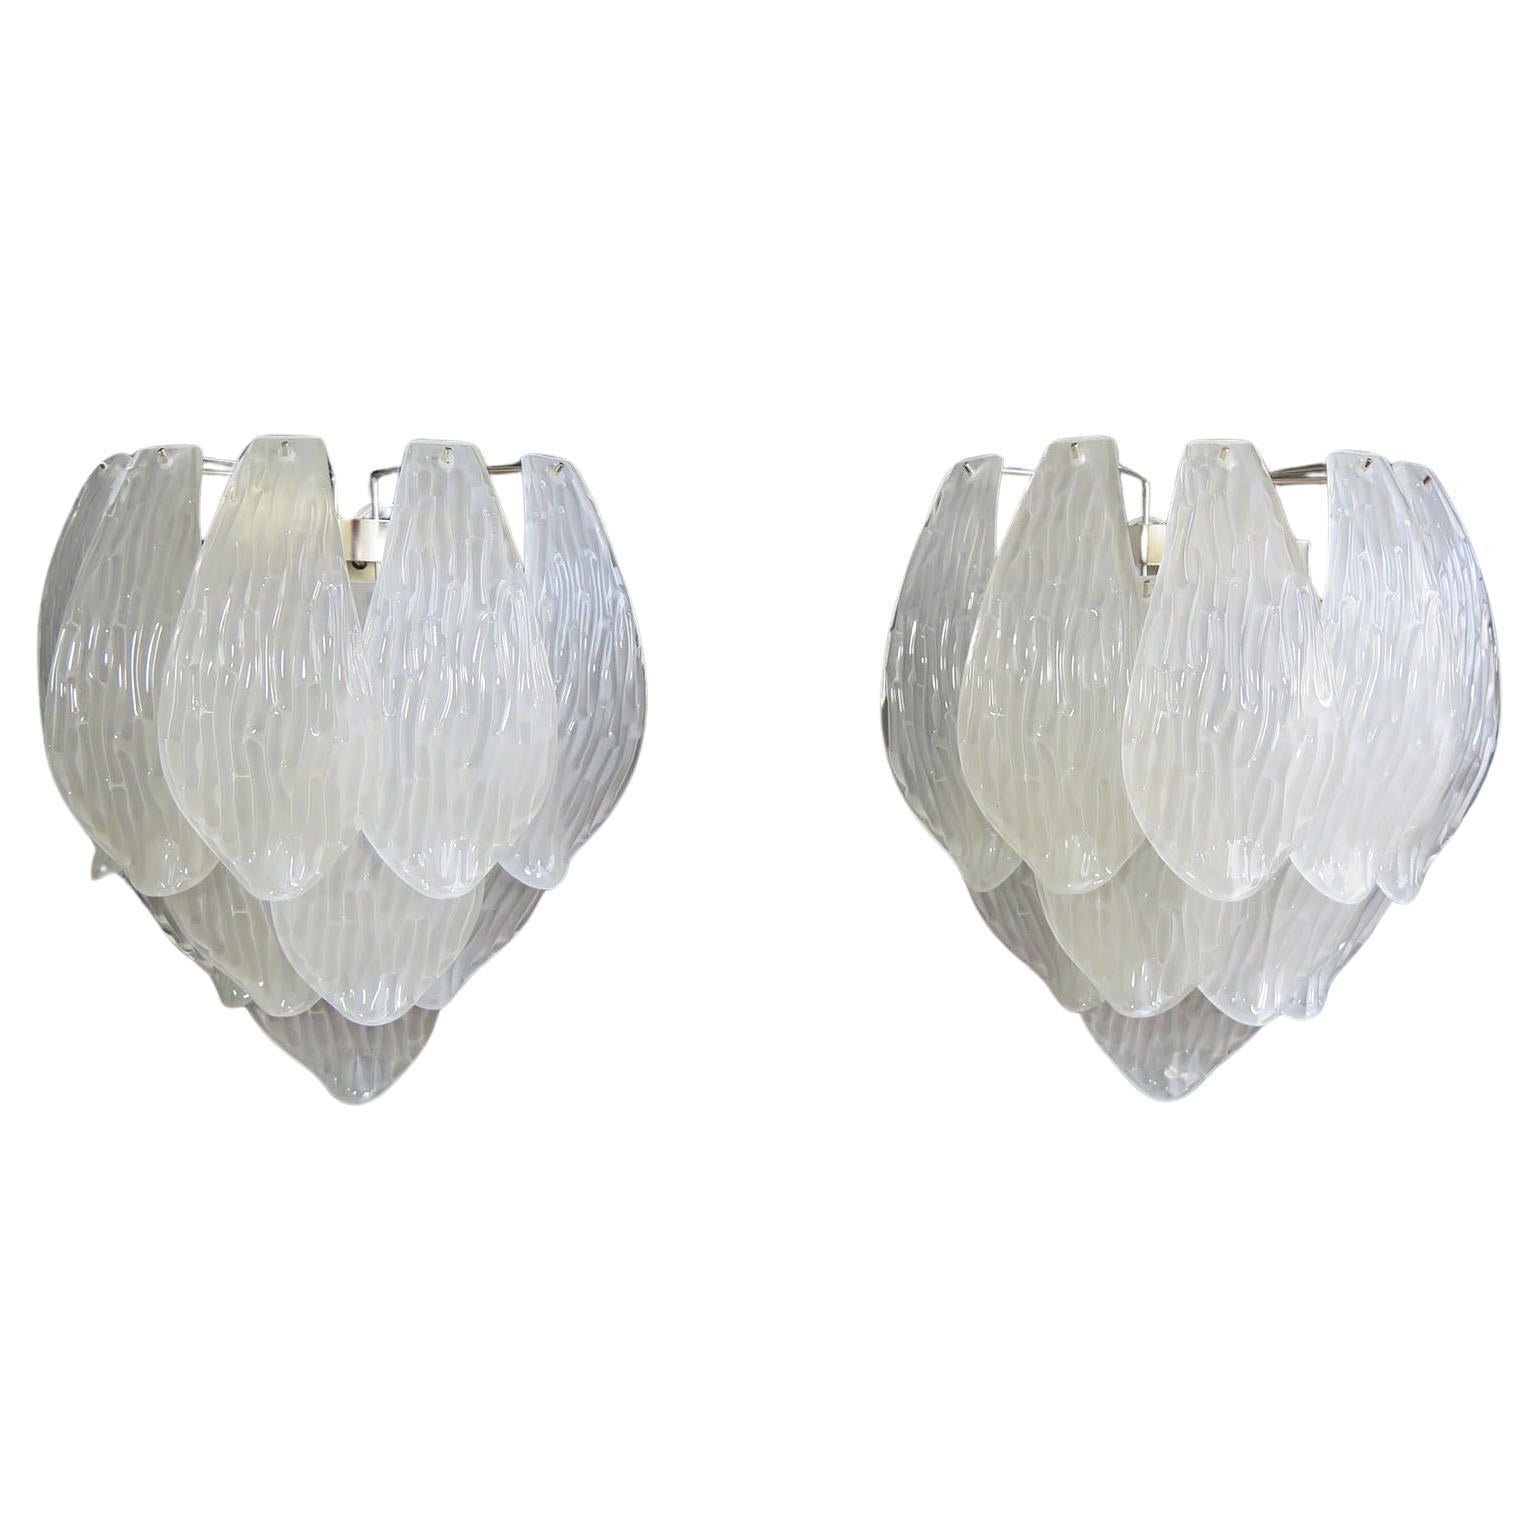 Pair of Italian vintage Murano glass wall sconces - frosted glasses